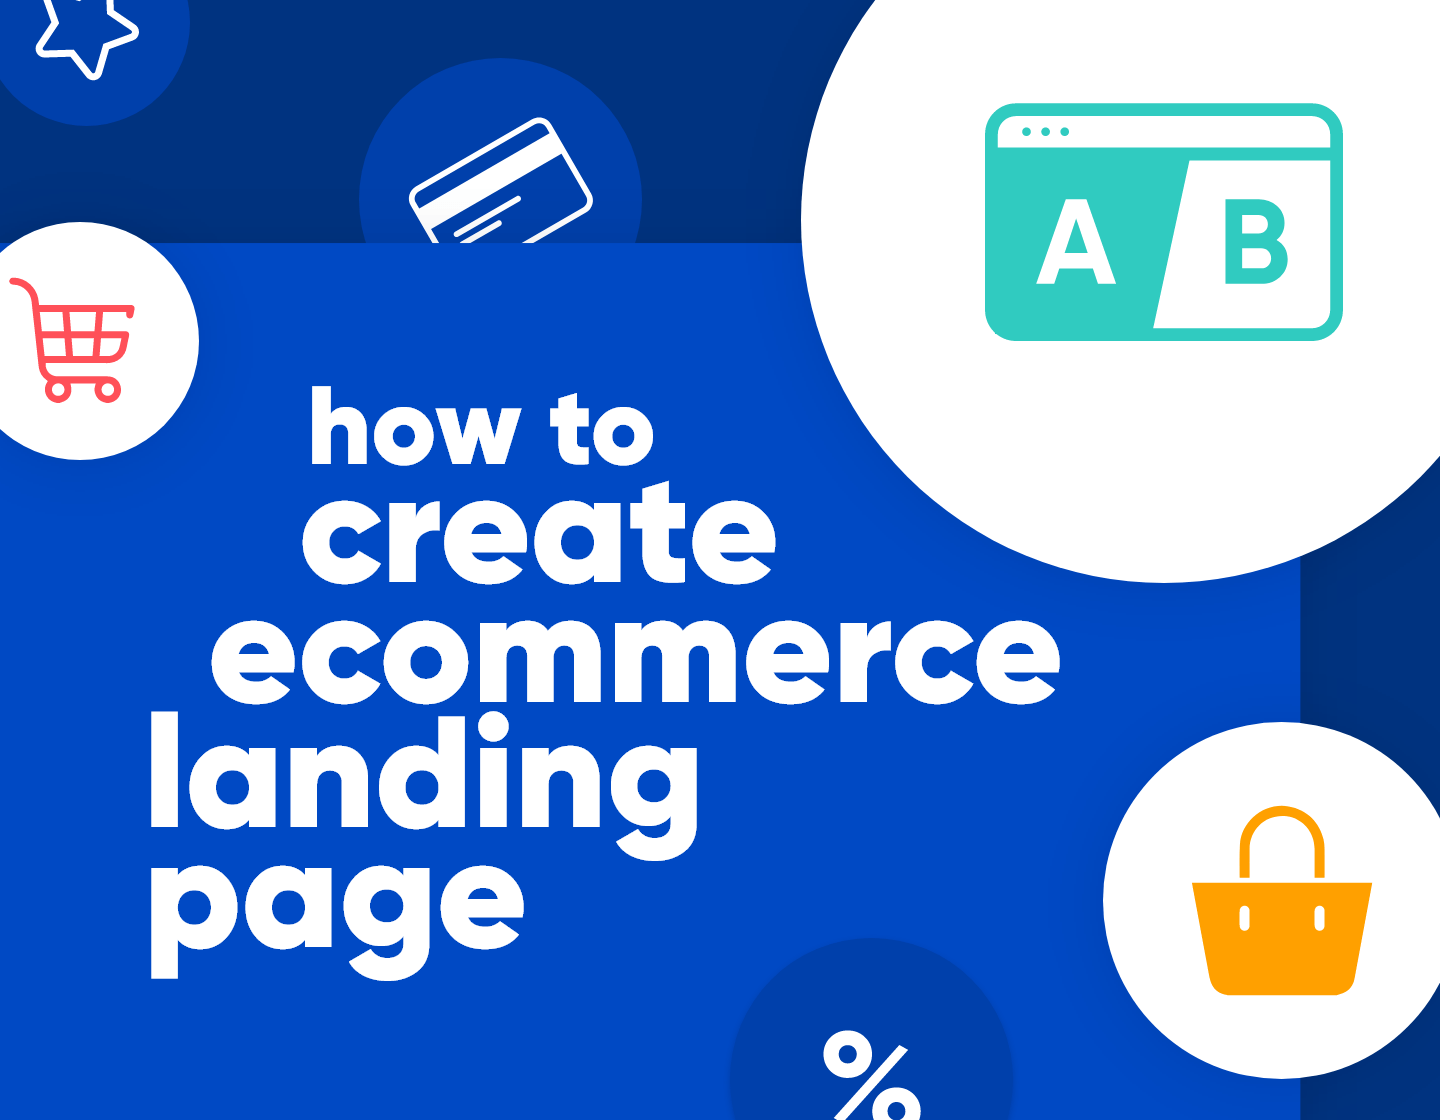 How To Create eCommerce Landing Page